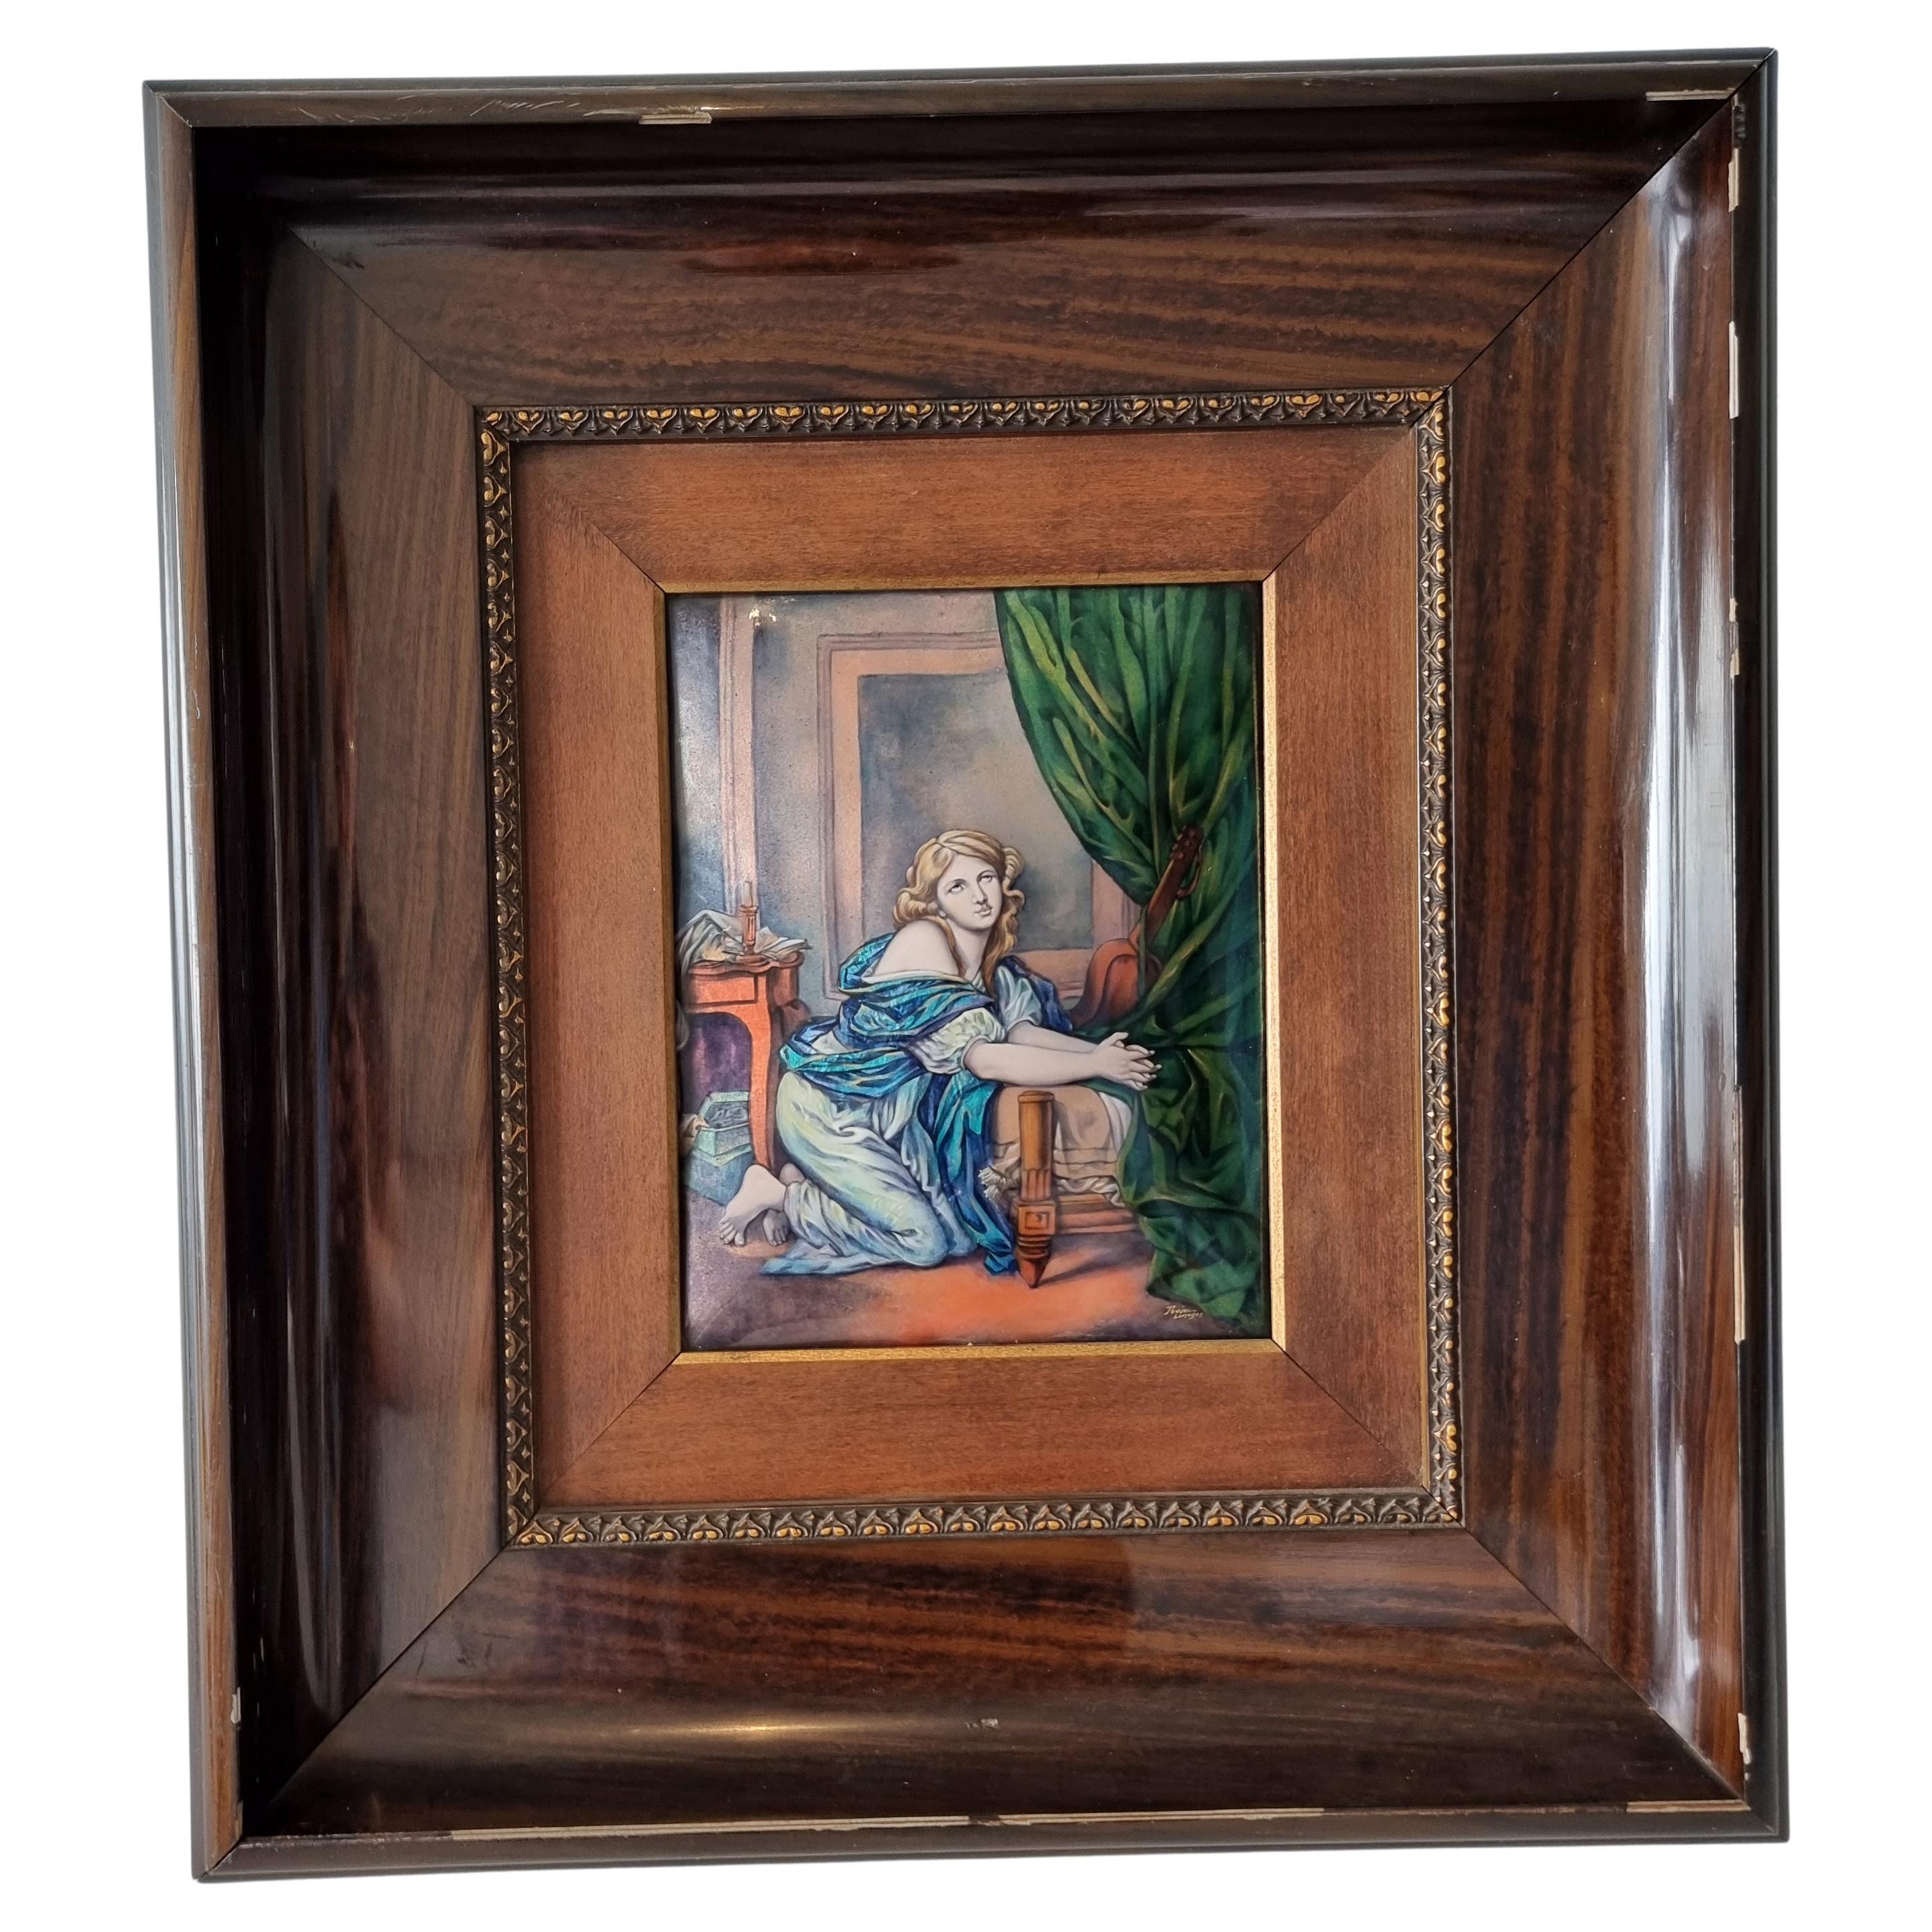 Limoges Enamel on Copper Panel of a Lady in Frame